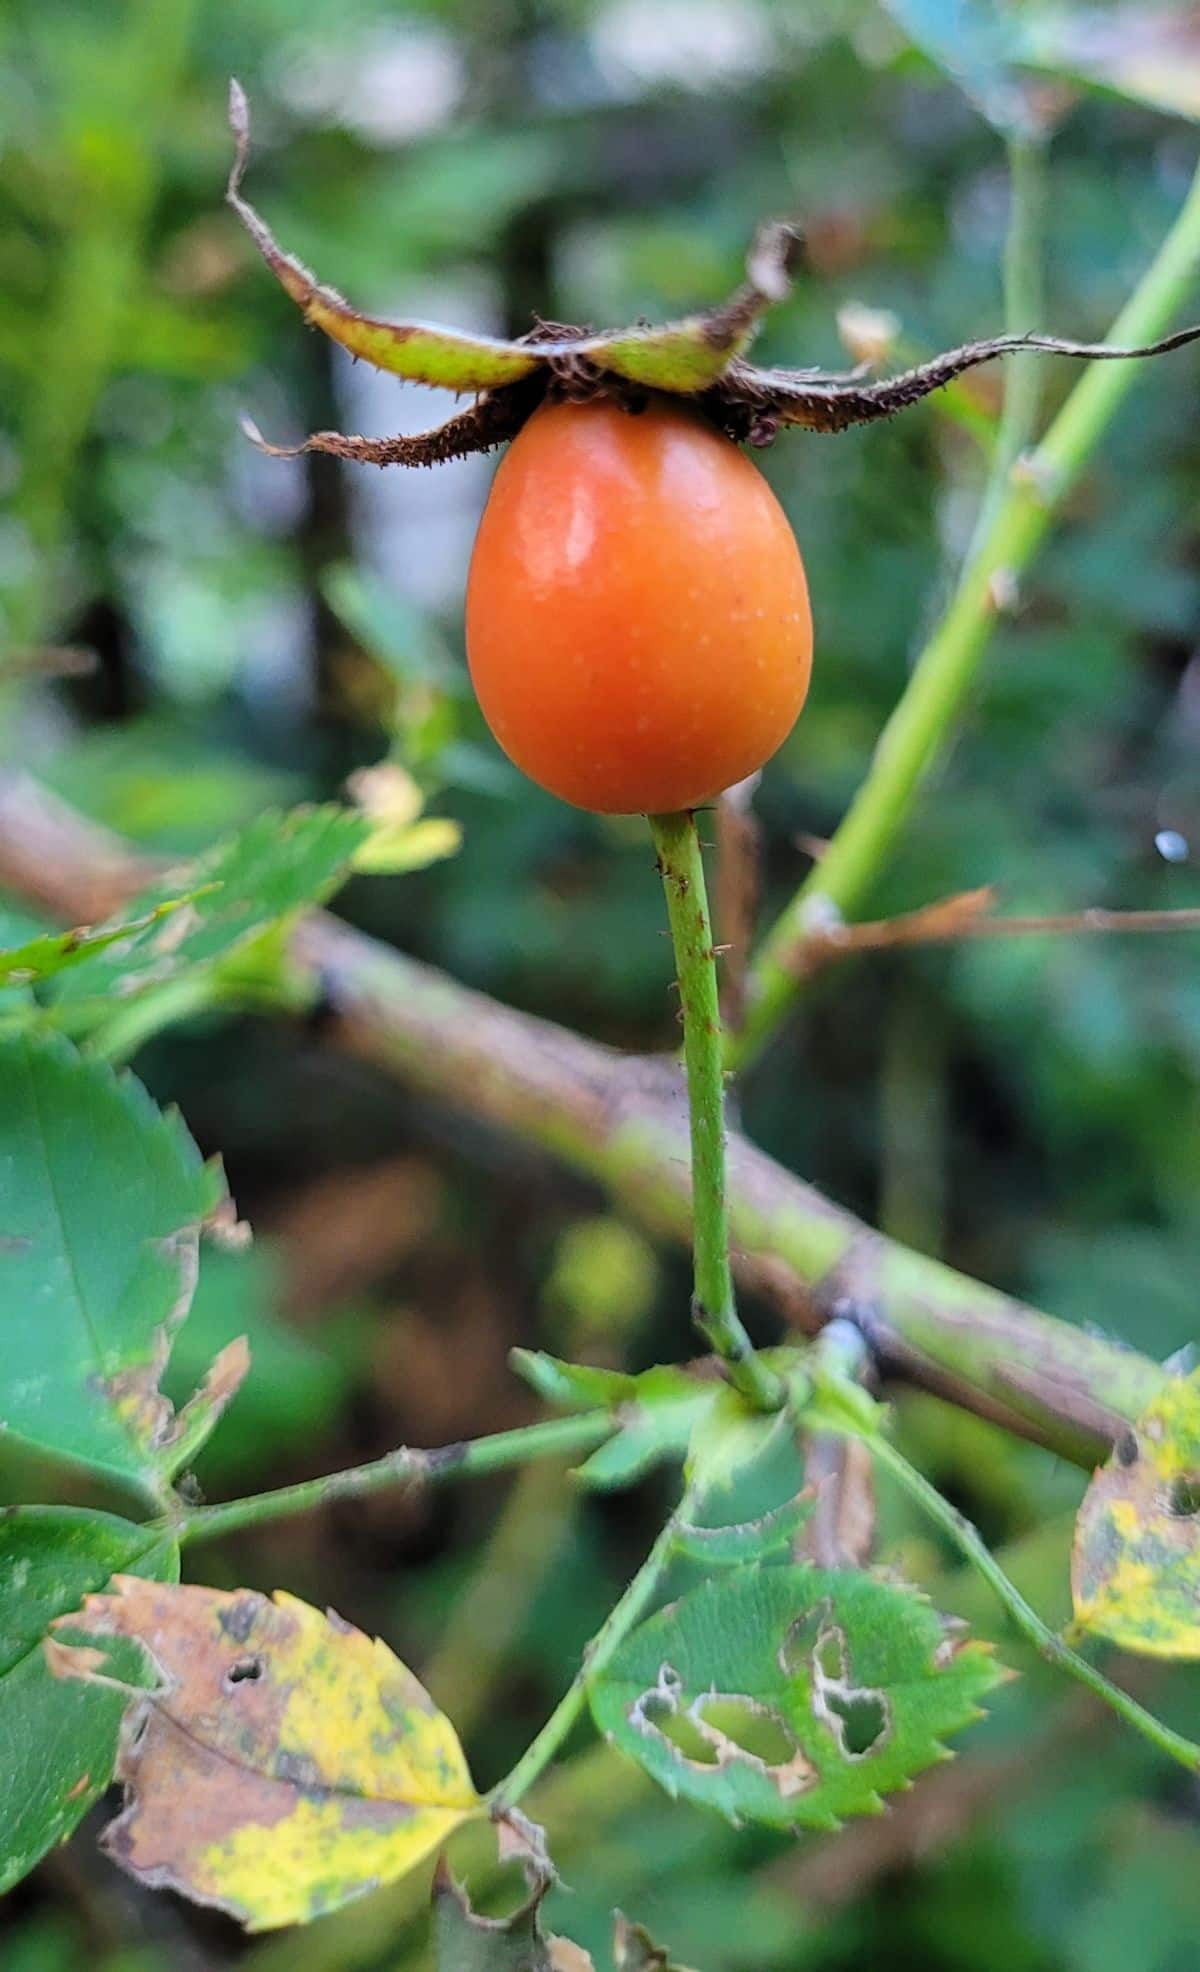 A rose hip on a late fall plant